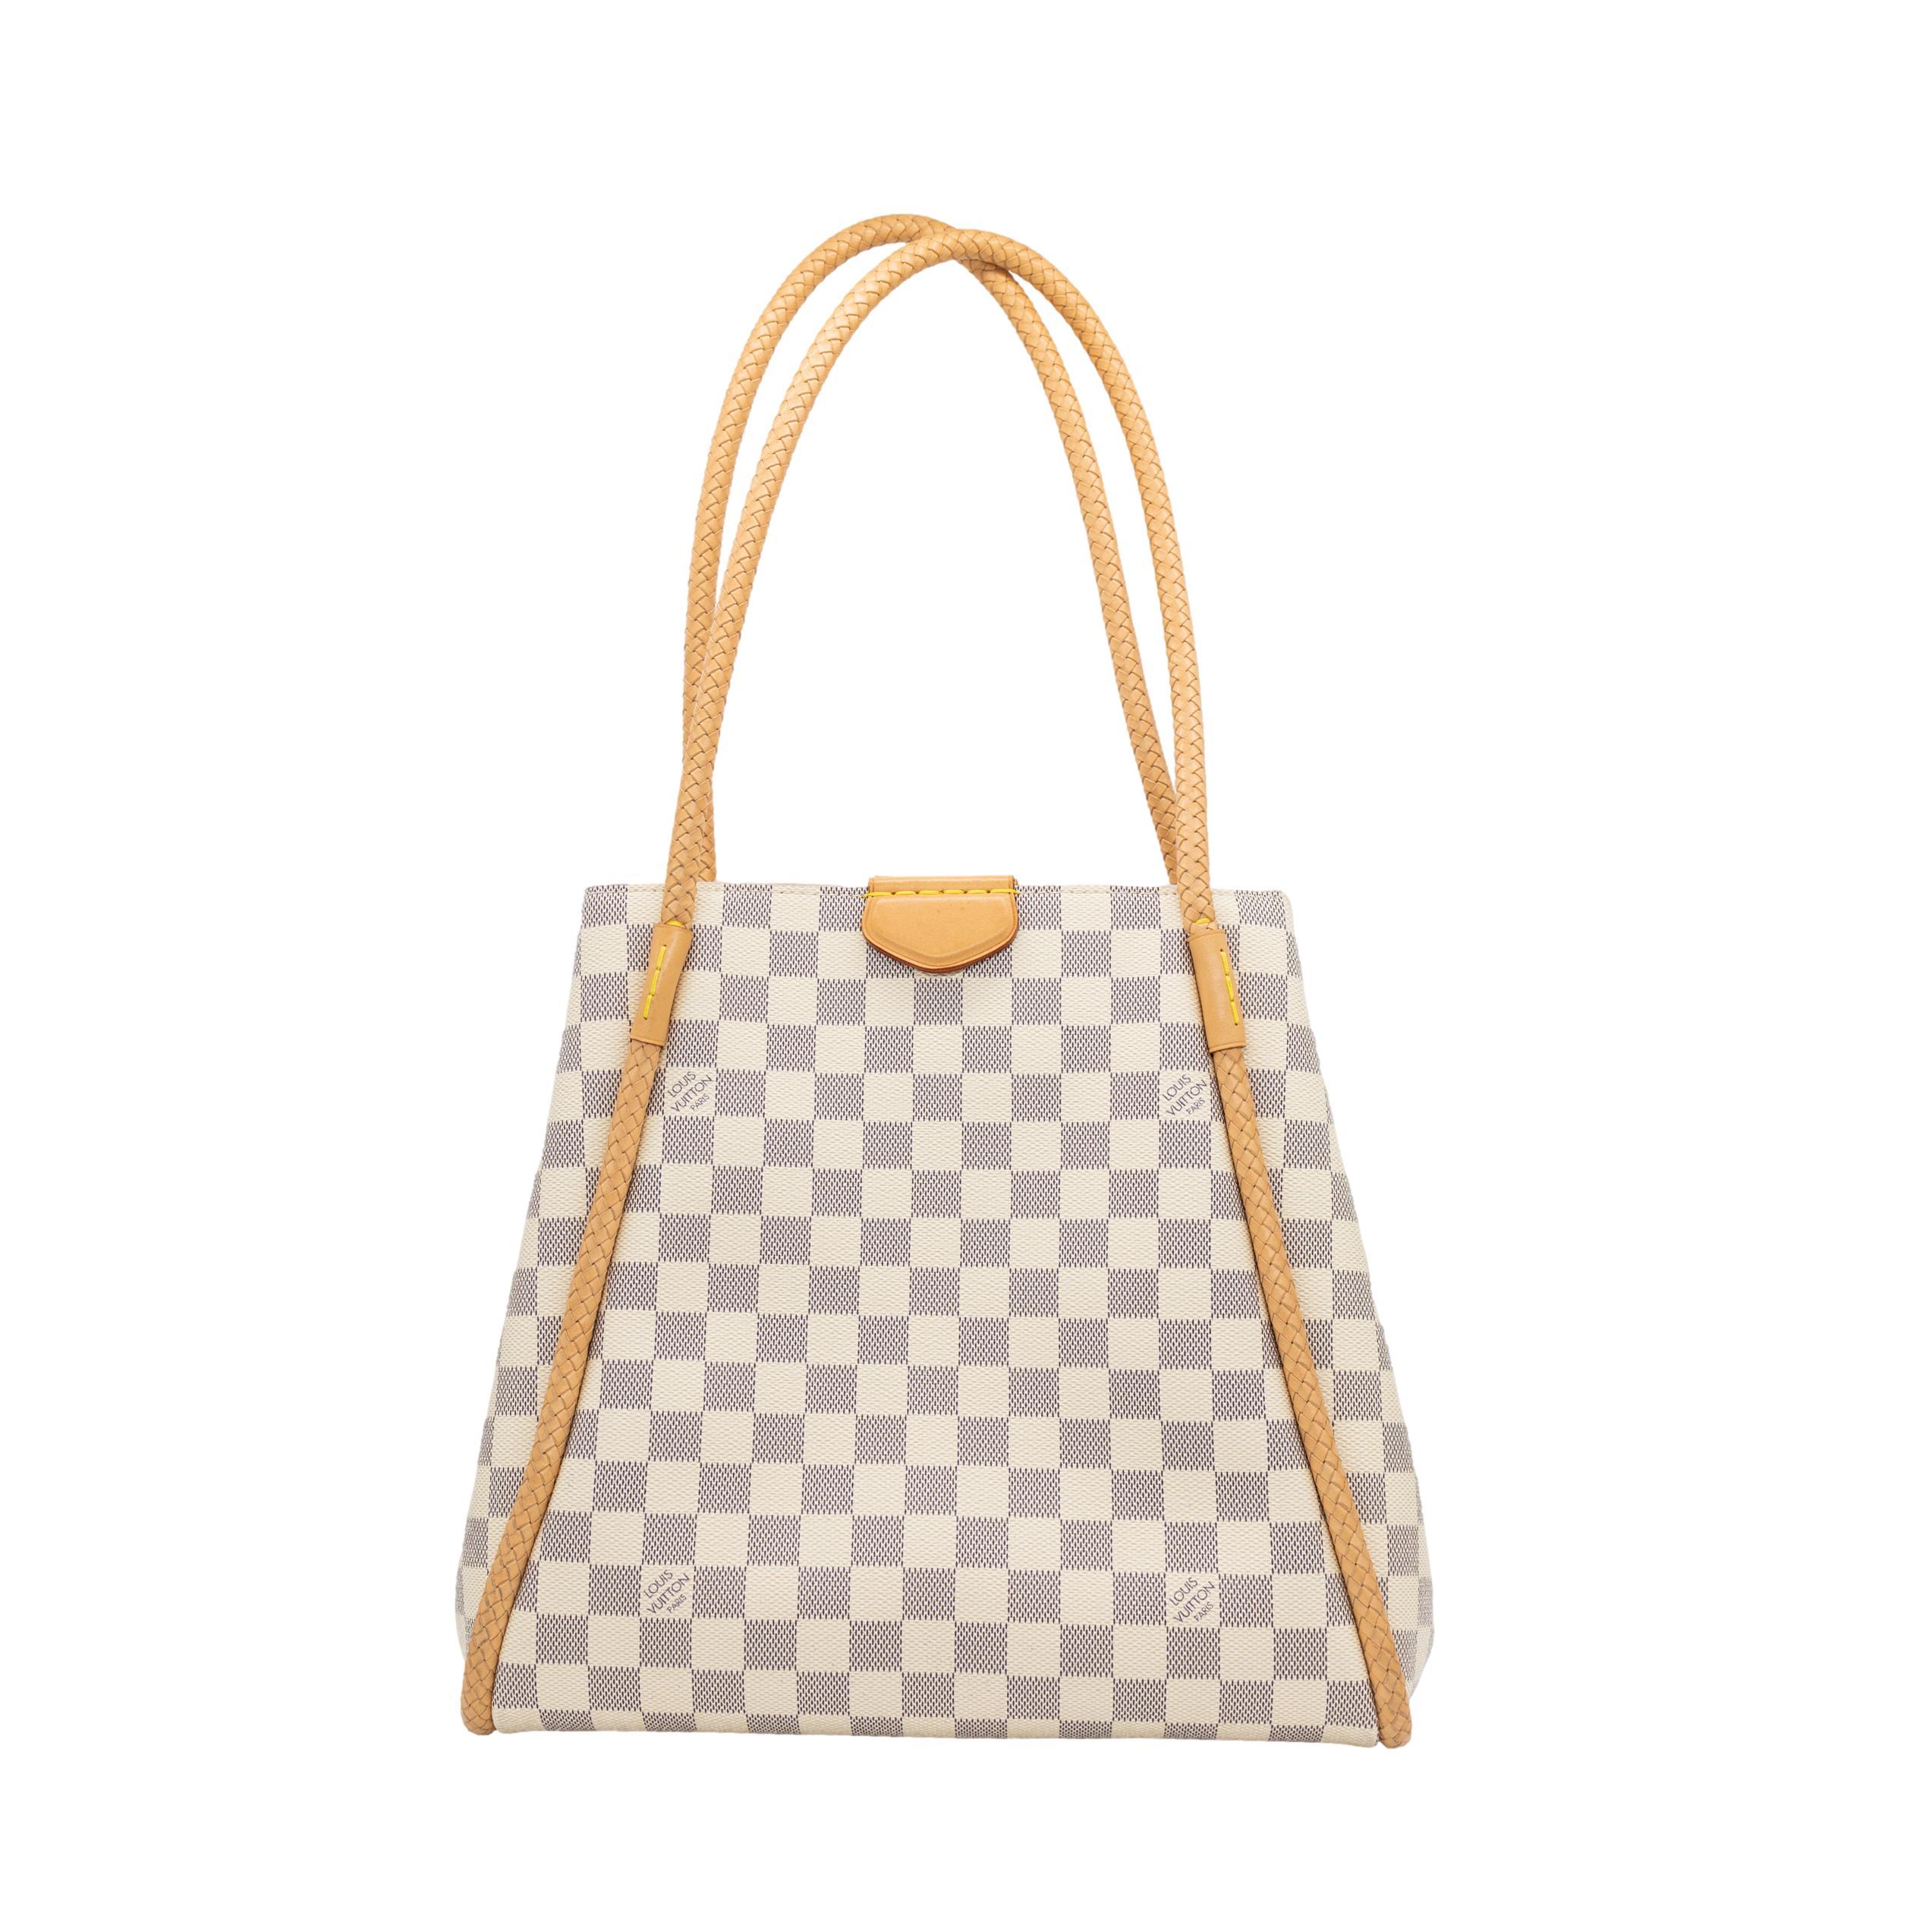 Louis Vuitton Damier Azure Propriano Braided Shoulder Tote Bag, France 2018. The iconic 